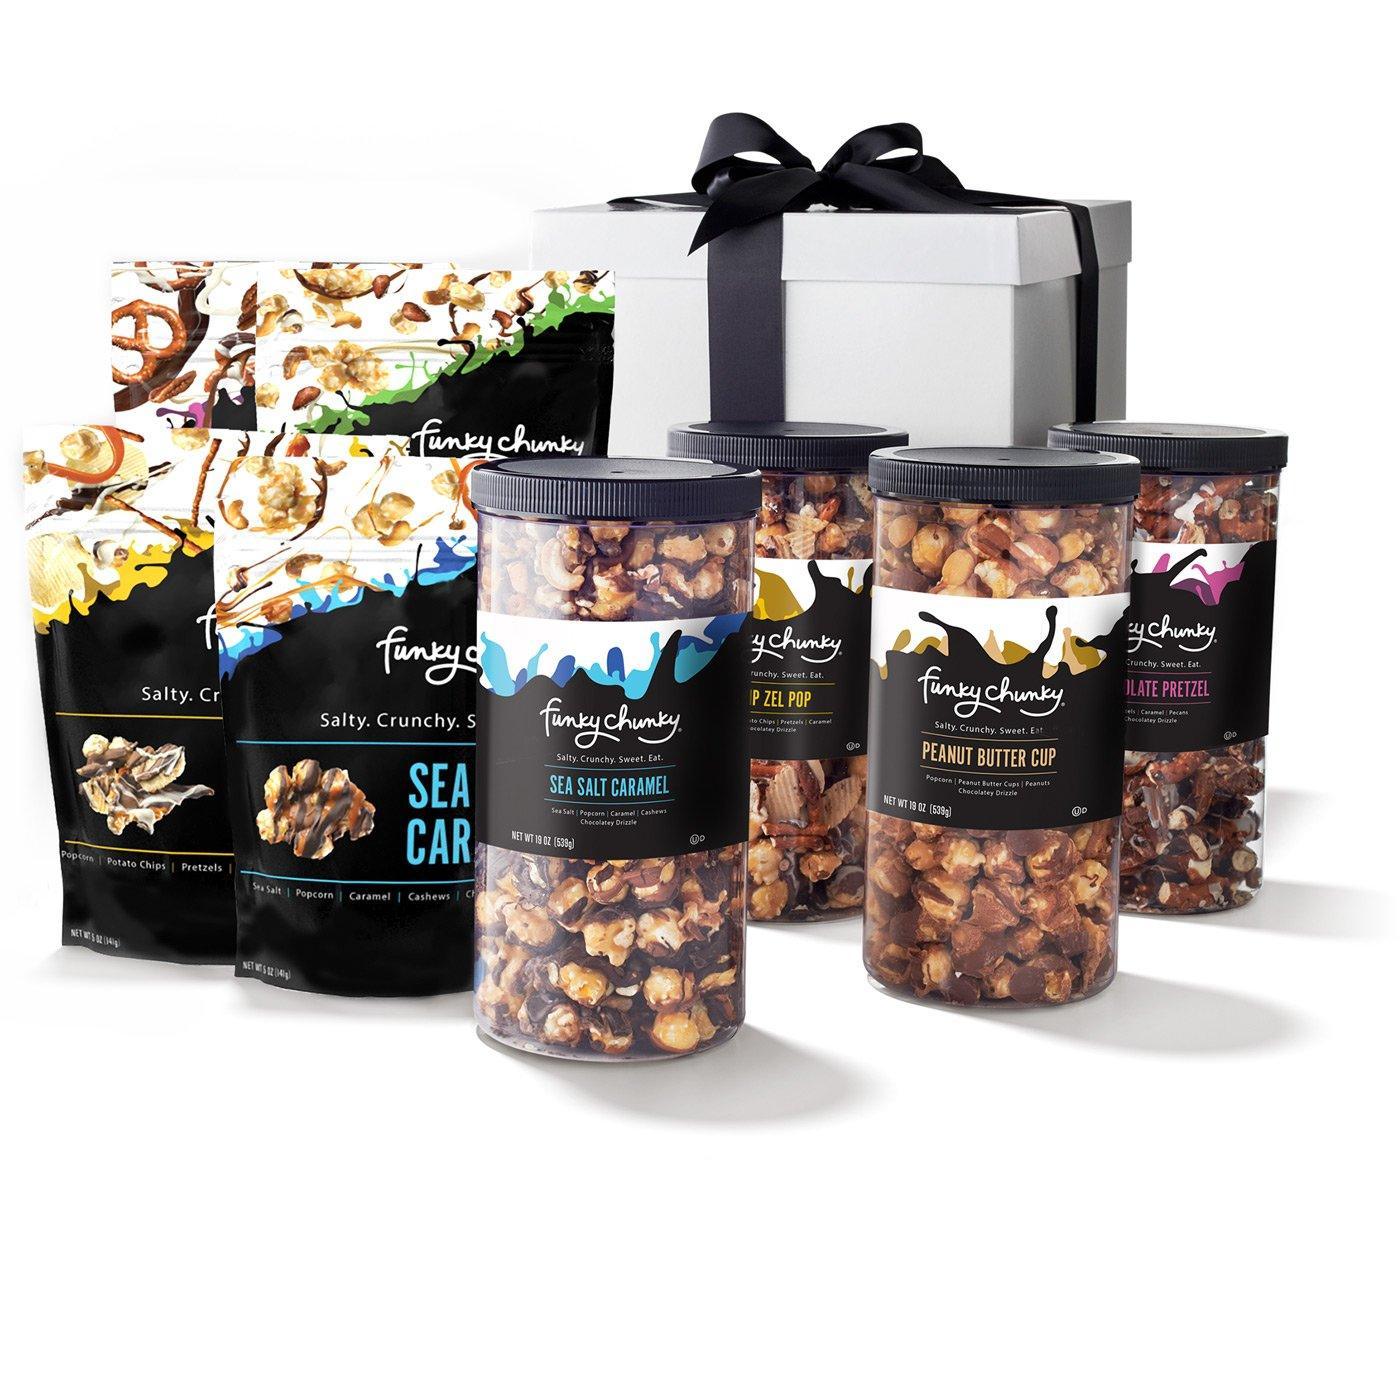 Premier Gift Pack-td {border: 1px solid #ccc;}br {mso-data-placement:same-cell;} Tall canisters of Peanut Butter Cup Popcorn, Chocolate Pretzels, Sea Salt Caramel Popcorn, plus large bags of Chocolate Popcorn, Chocolate Pretzels, Sea Salt Caramel Popcorn and Chip-Zel-Pop. Canisters arrive neatly wrapped in a deluxe gift box with a bow.-Funky Chunky